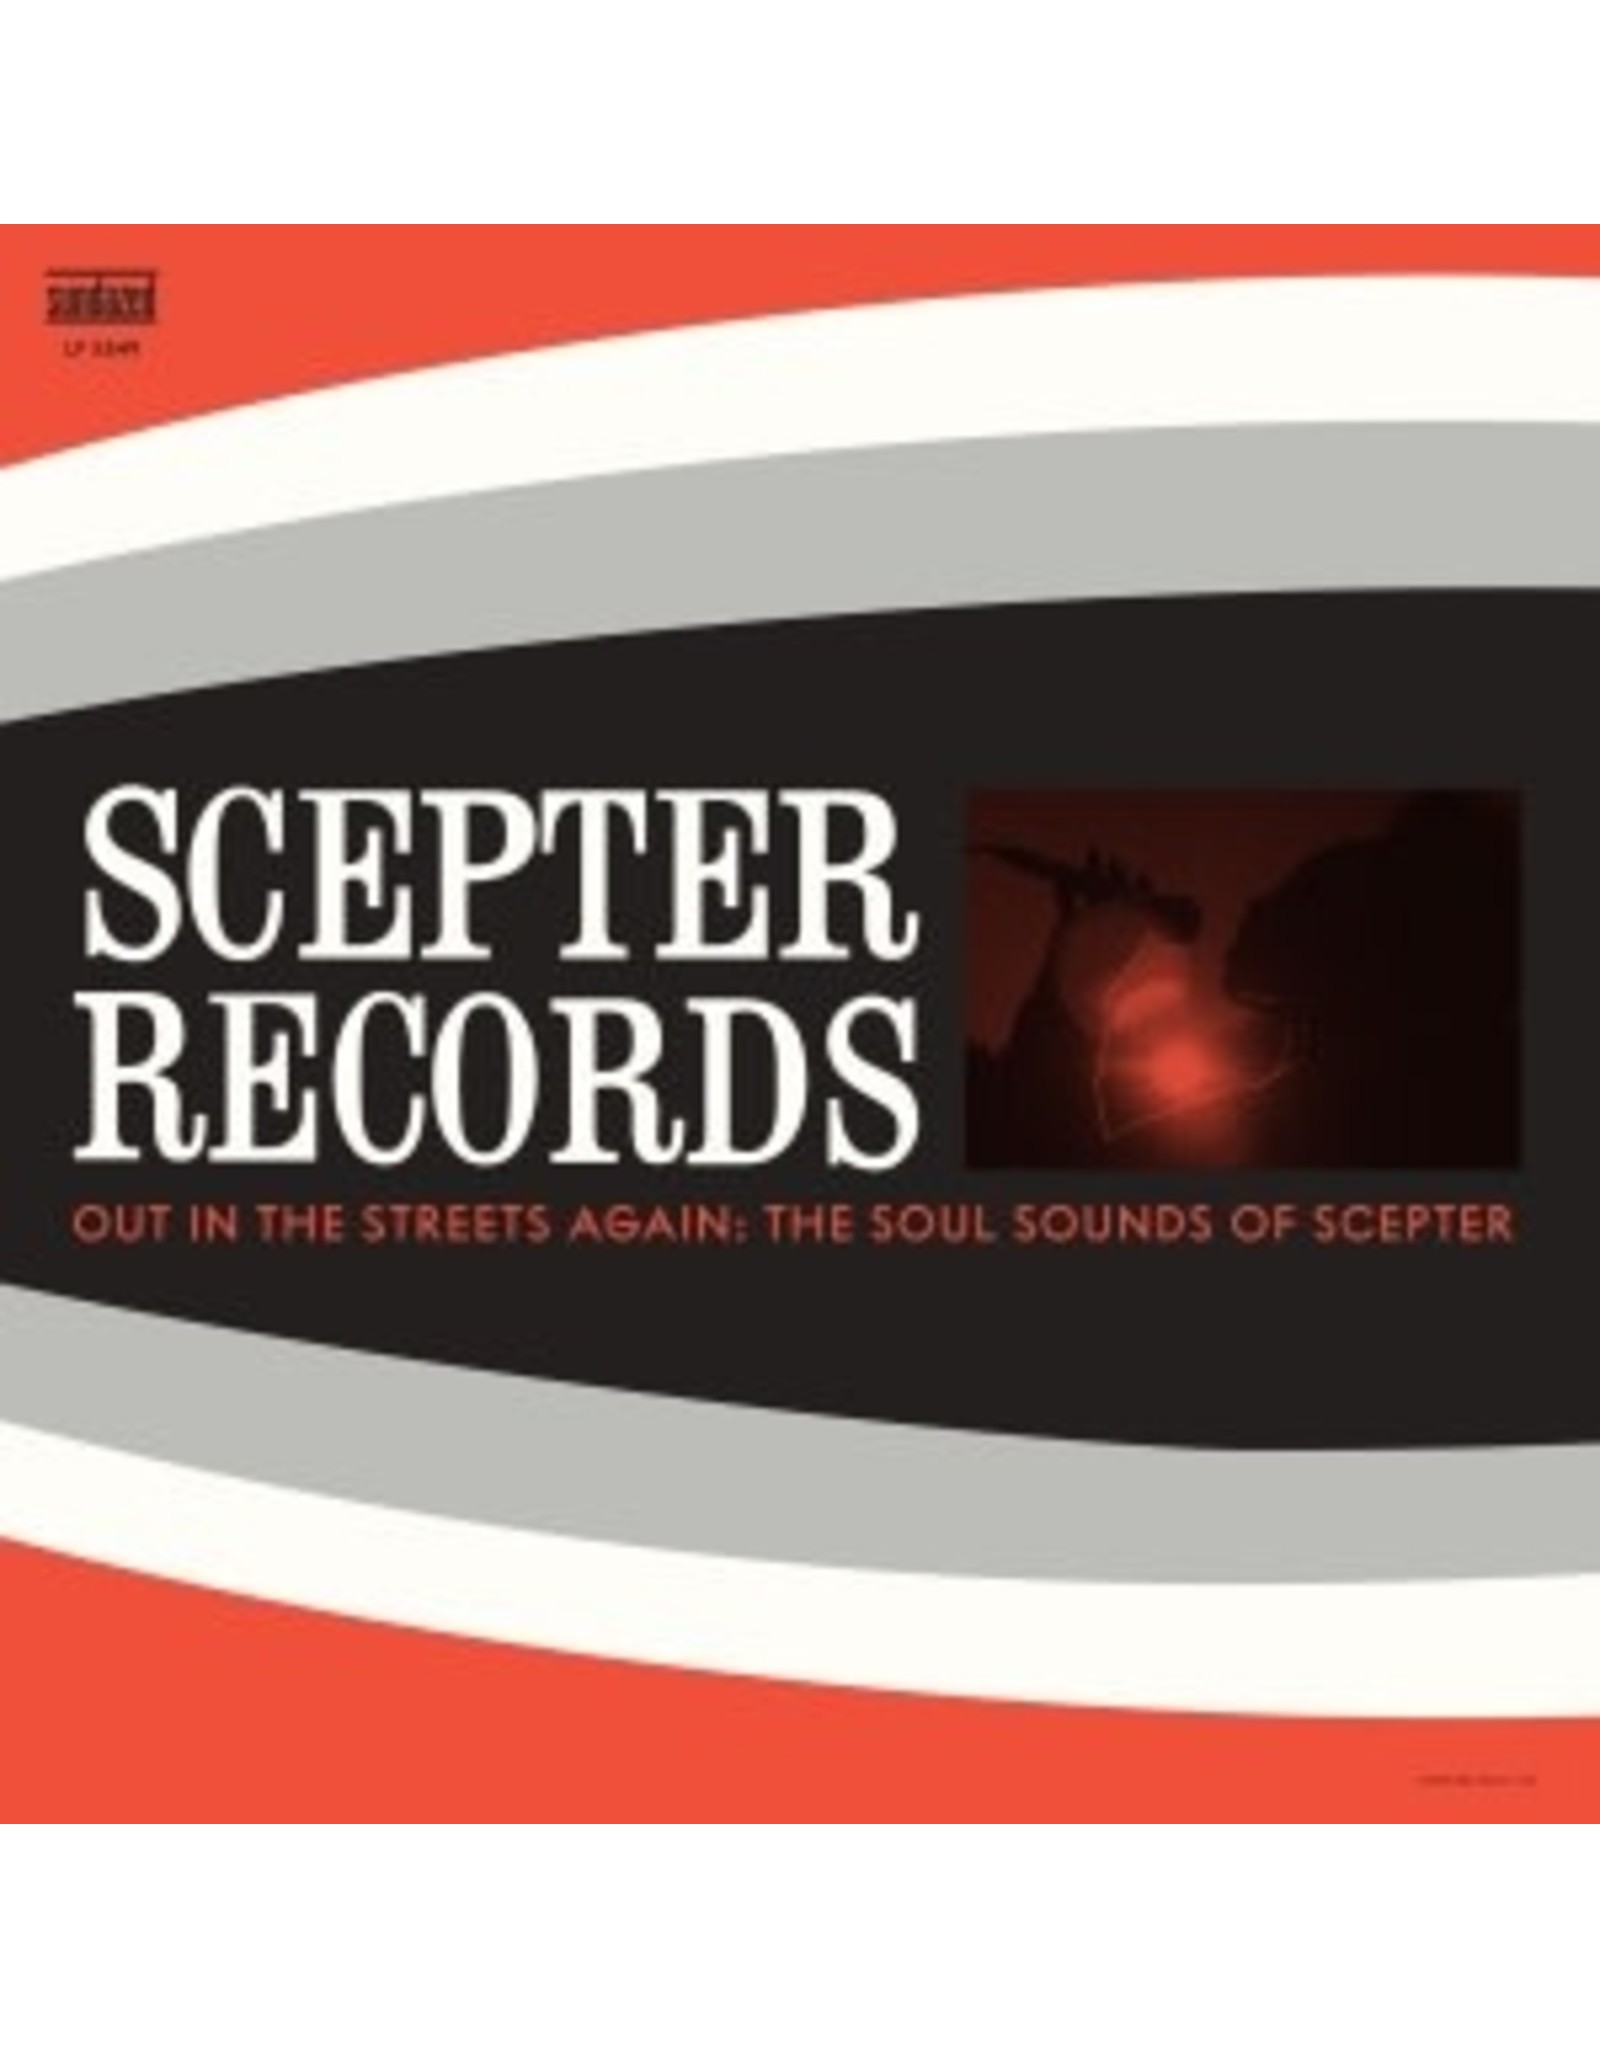 Sundazed Various: Out in the Streets Again: The Soul Sounds of Scepter Records LP